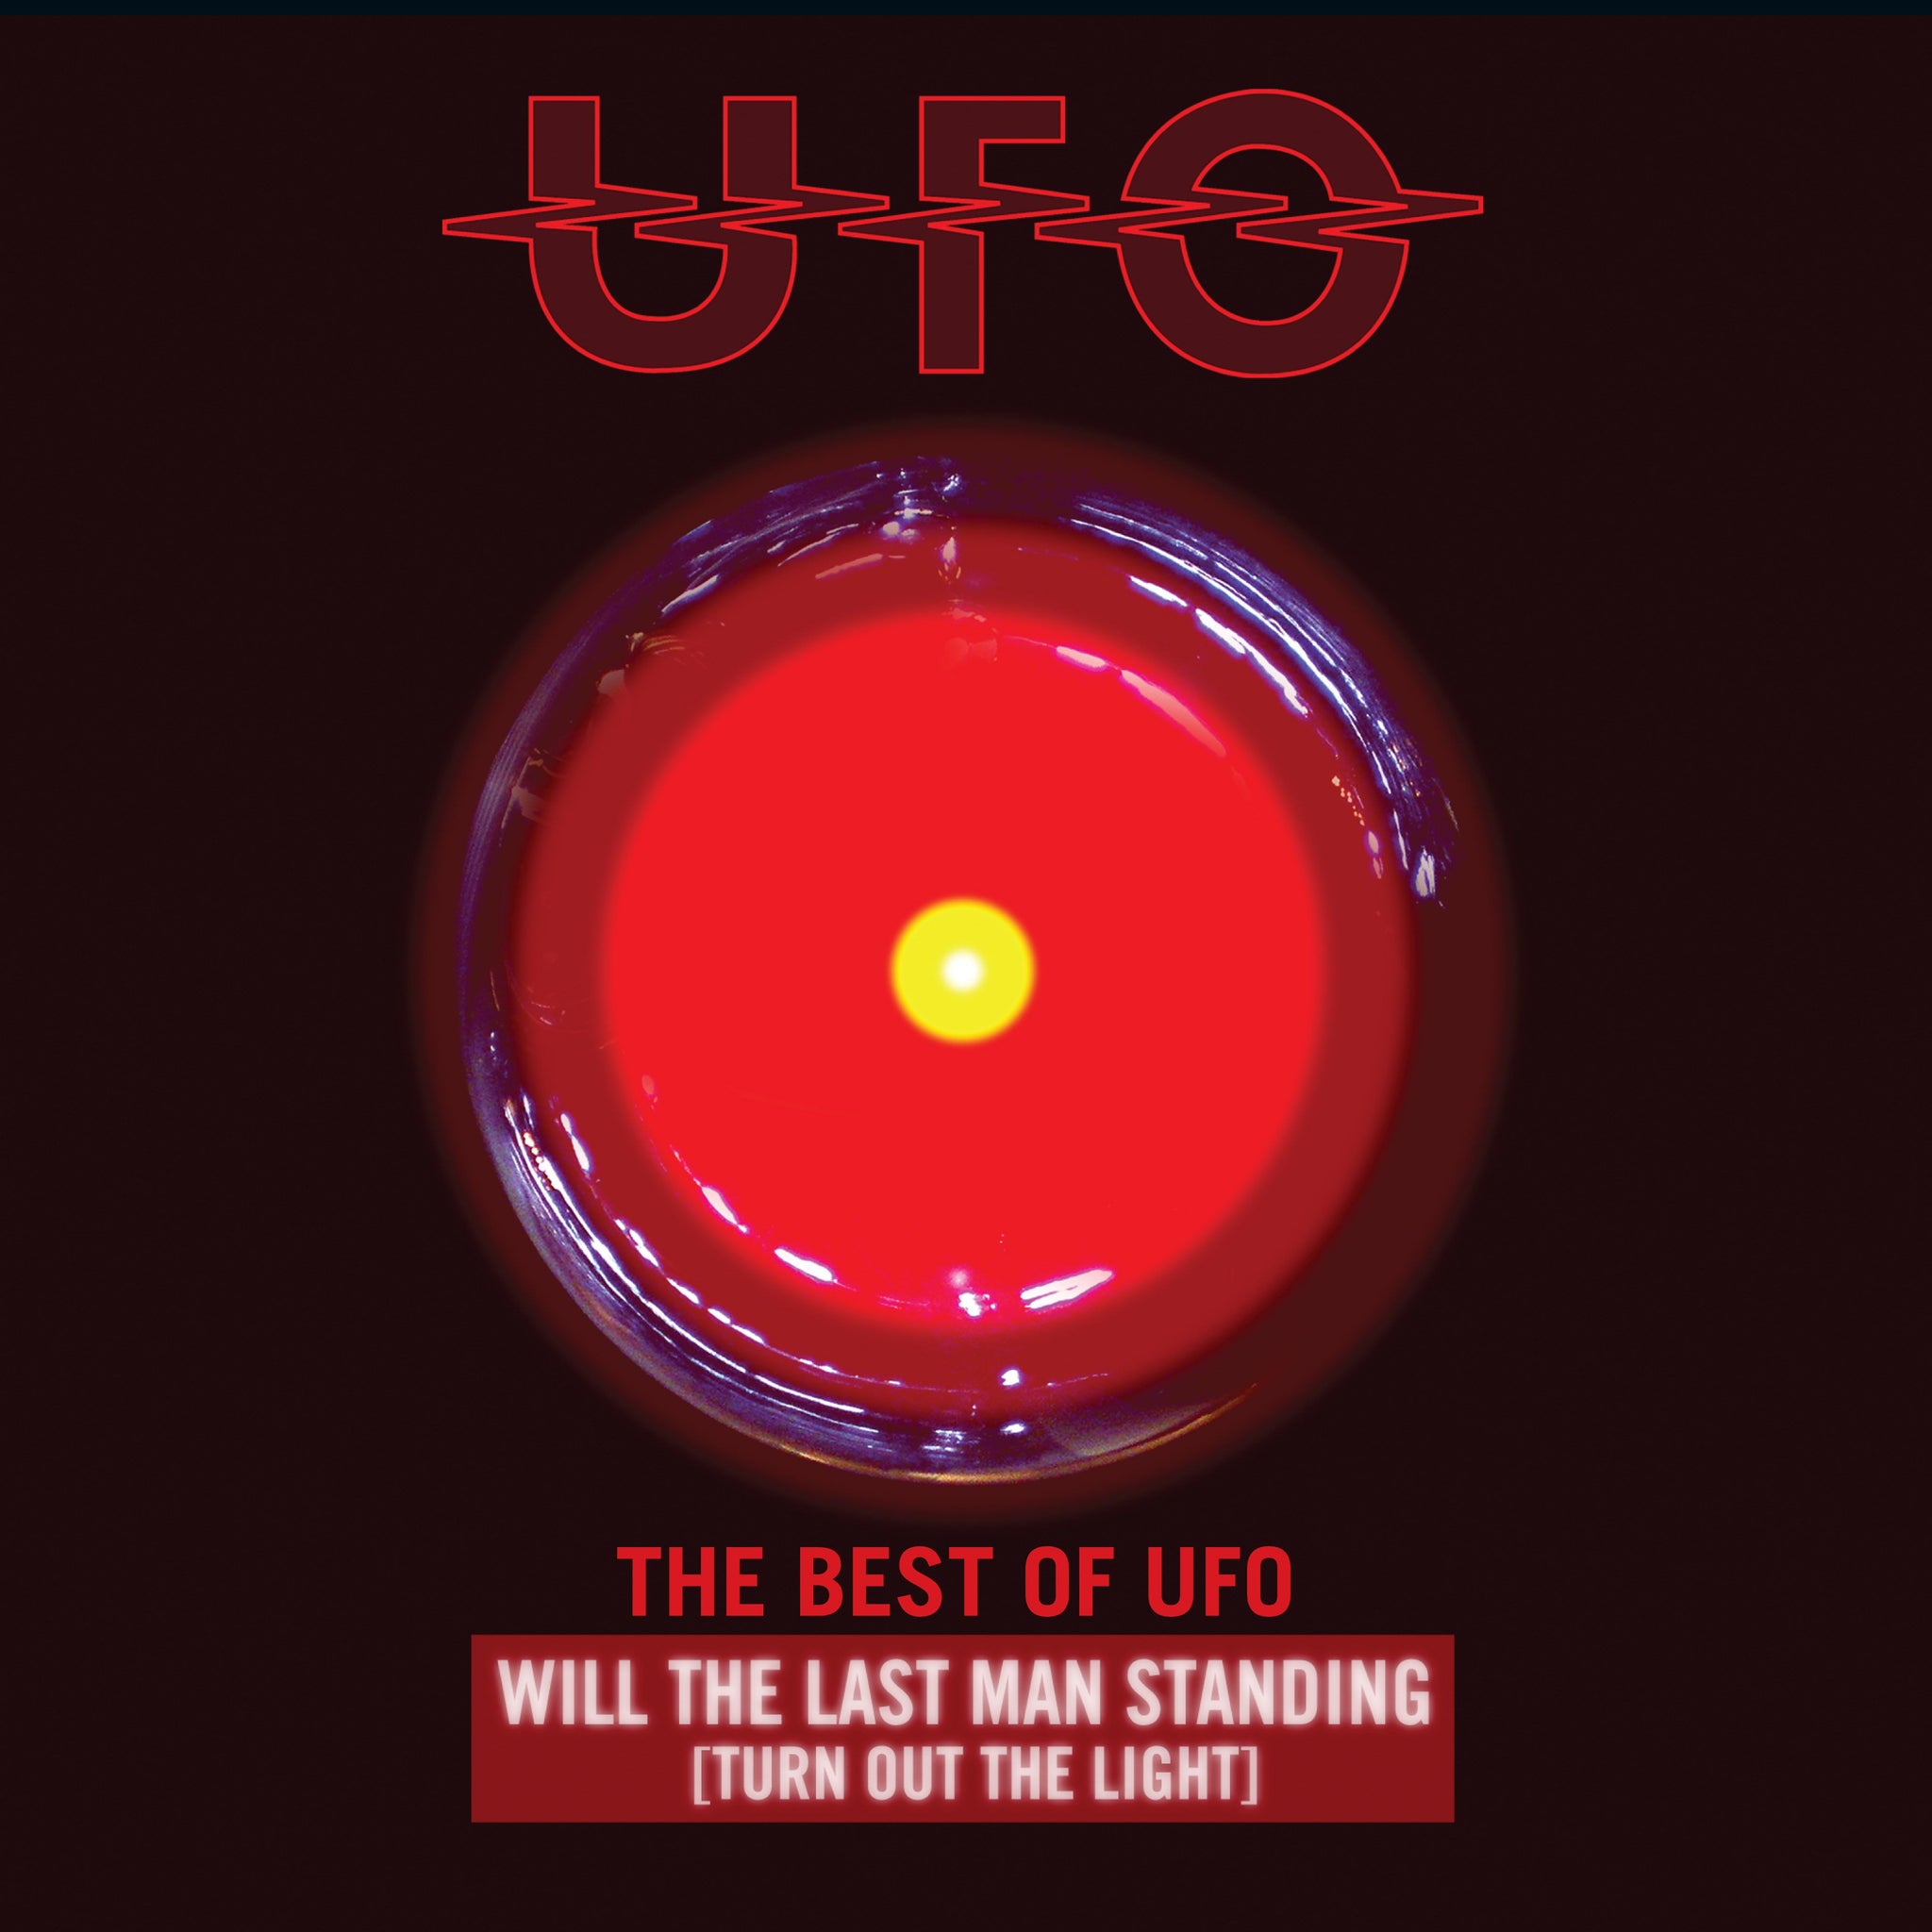 UFO - Will The Last Man Standing [Turn Out The Light]: The Best of UFO - 2LP - Vinyl [RSD23]